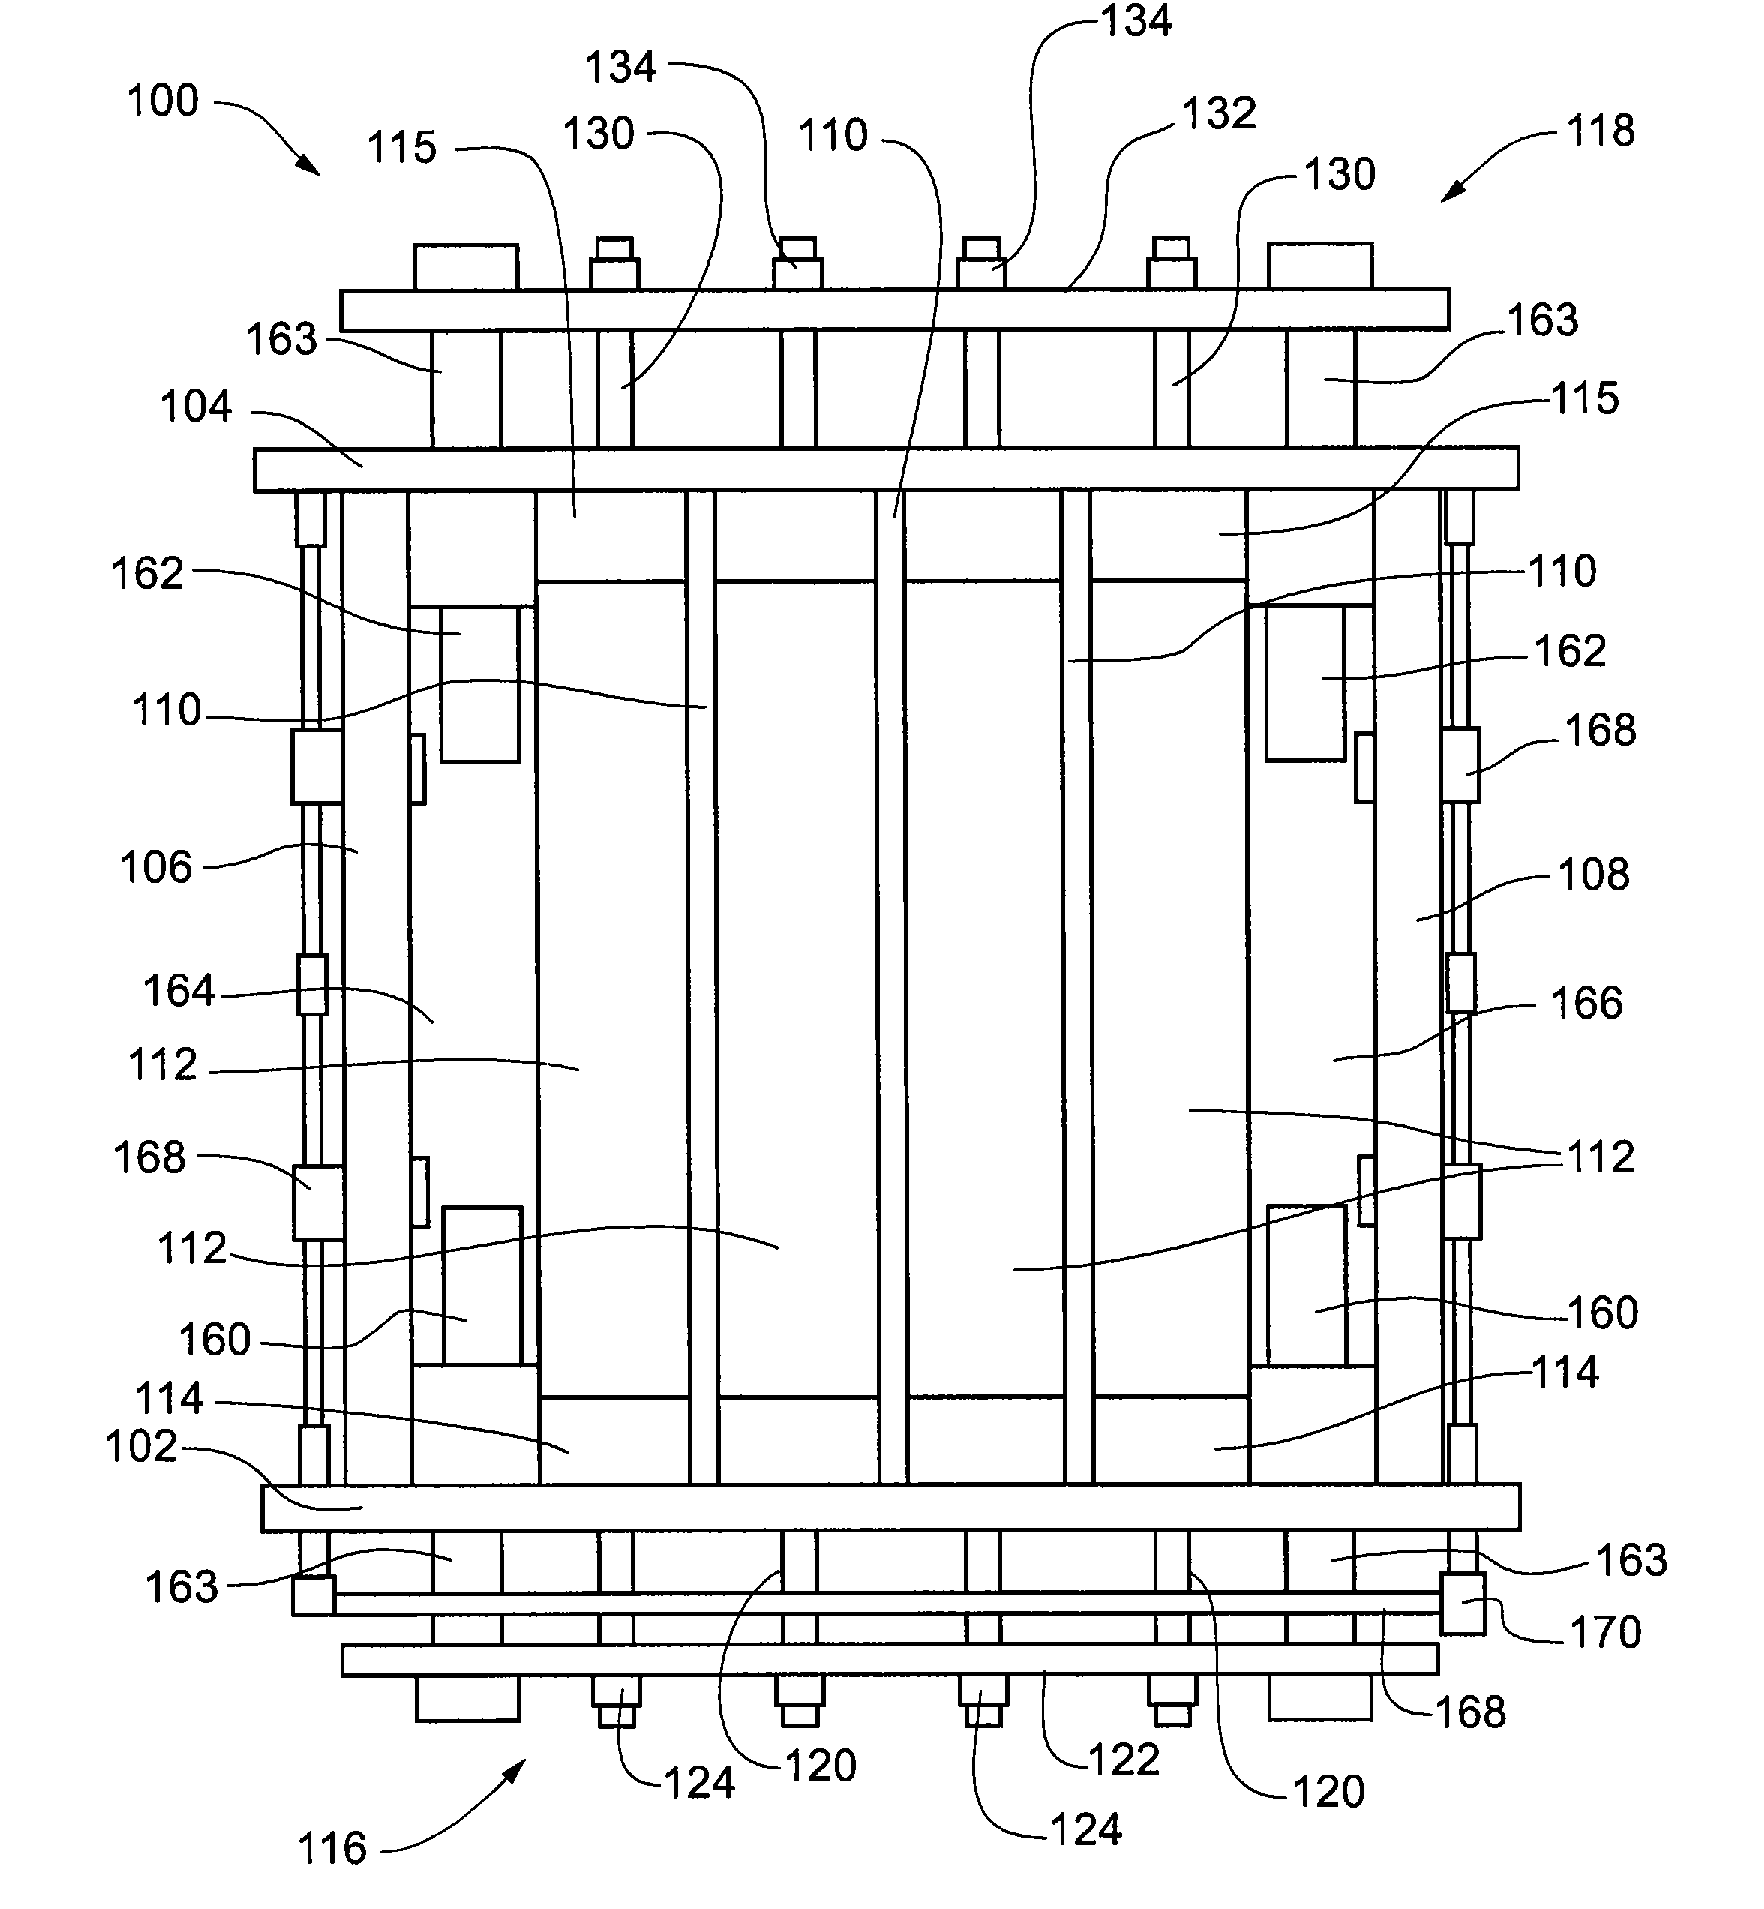 System and method for manufacturing concrete blocks